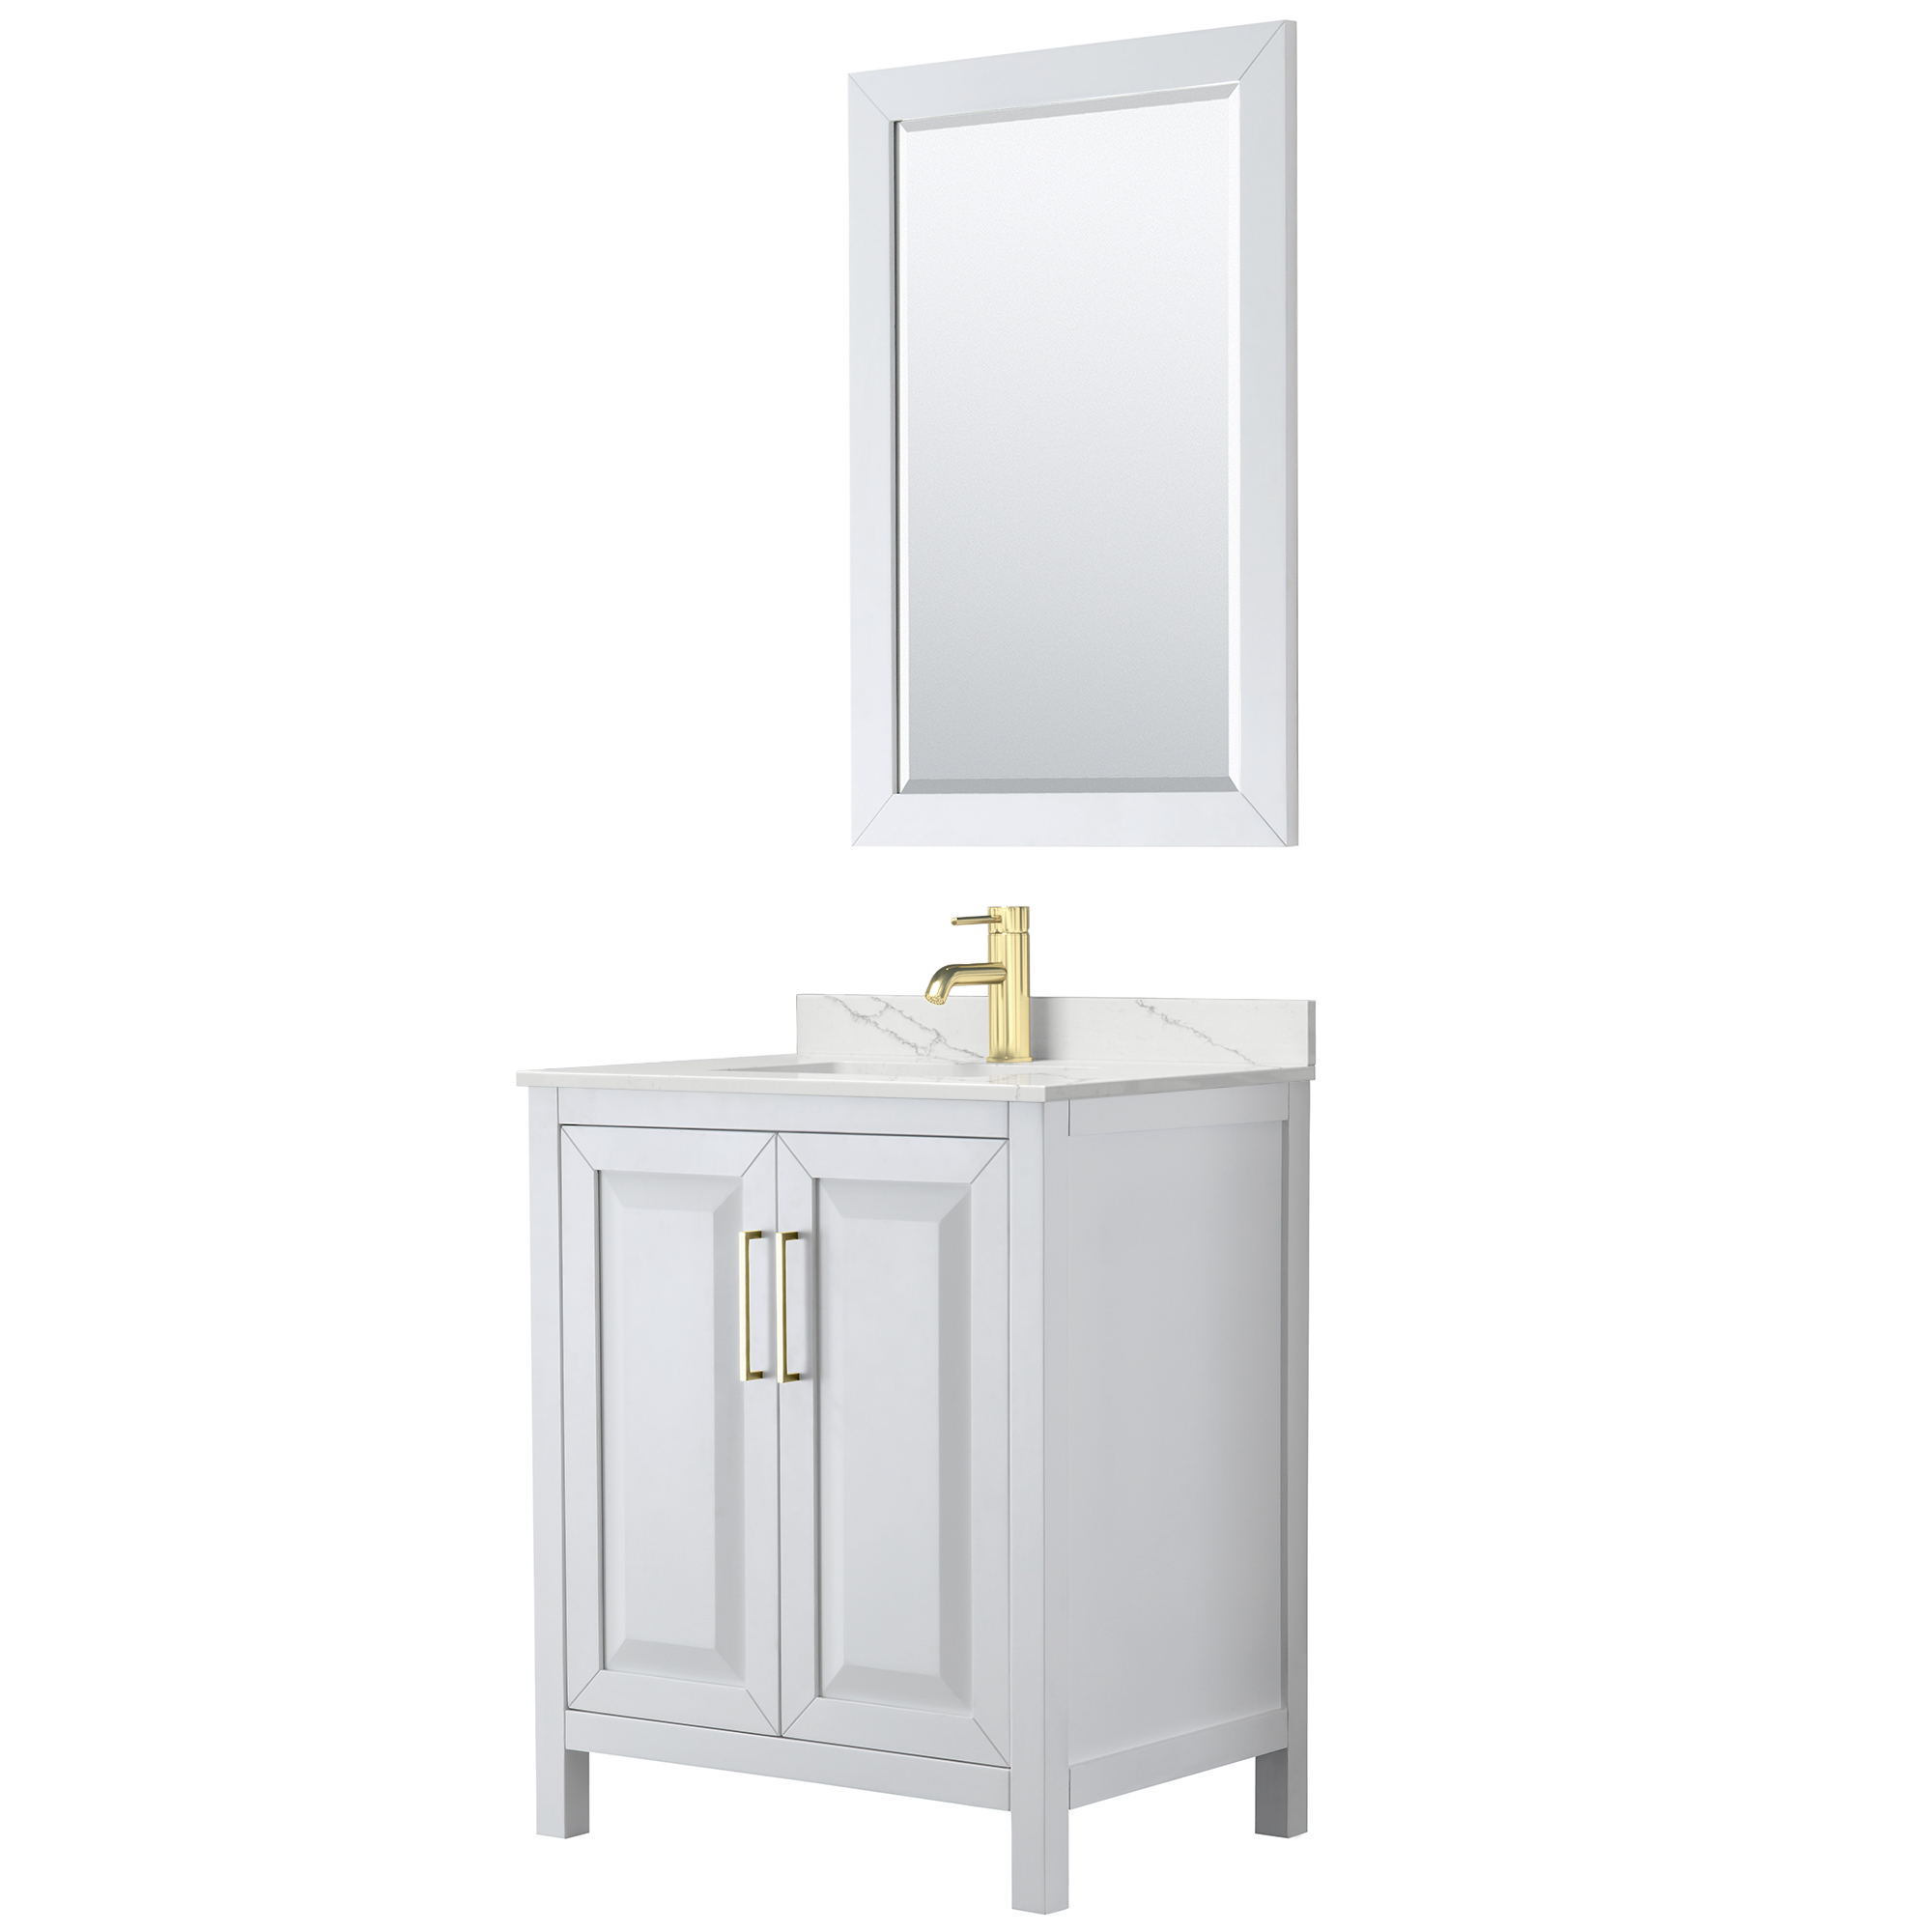 daria 30" single bathroom vanity by wyndham collection - white